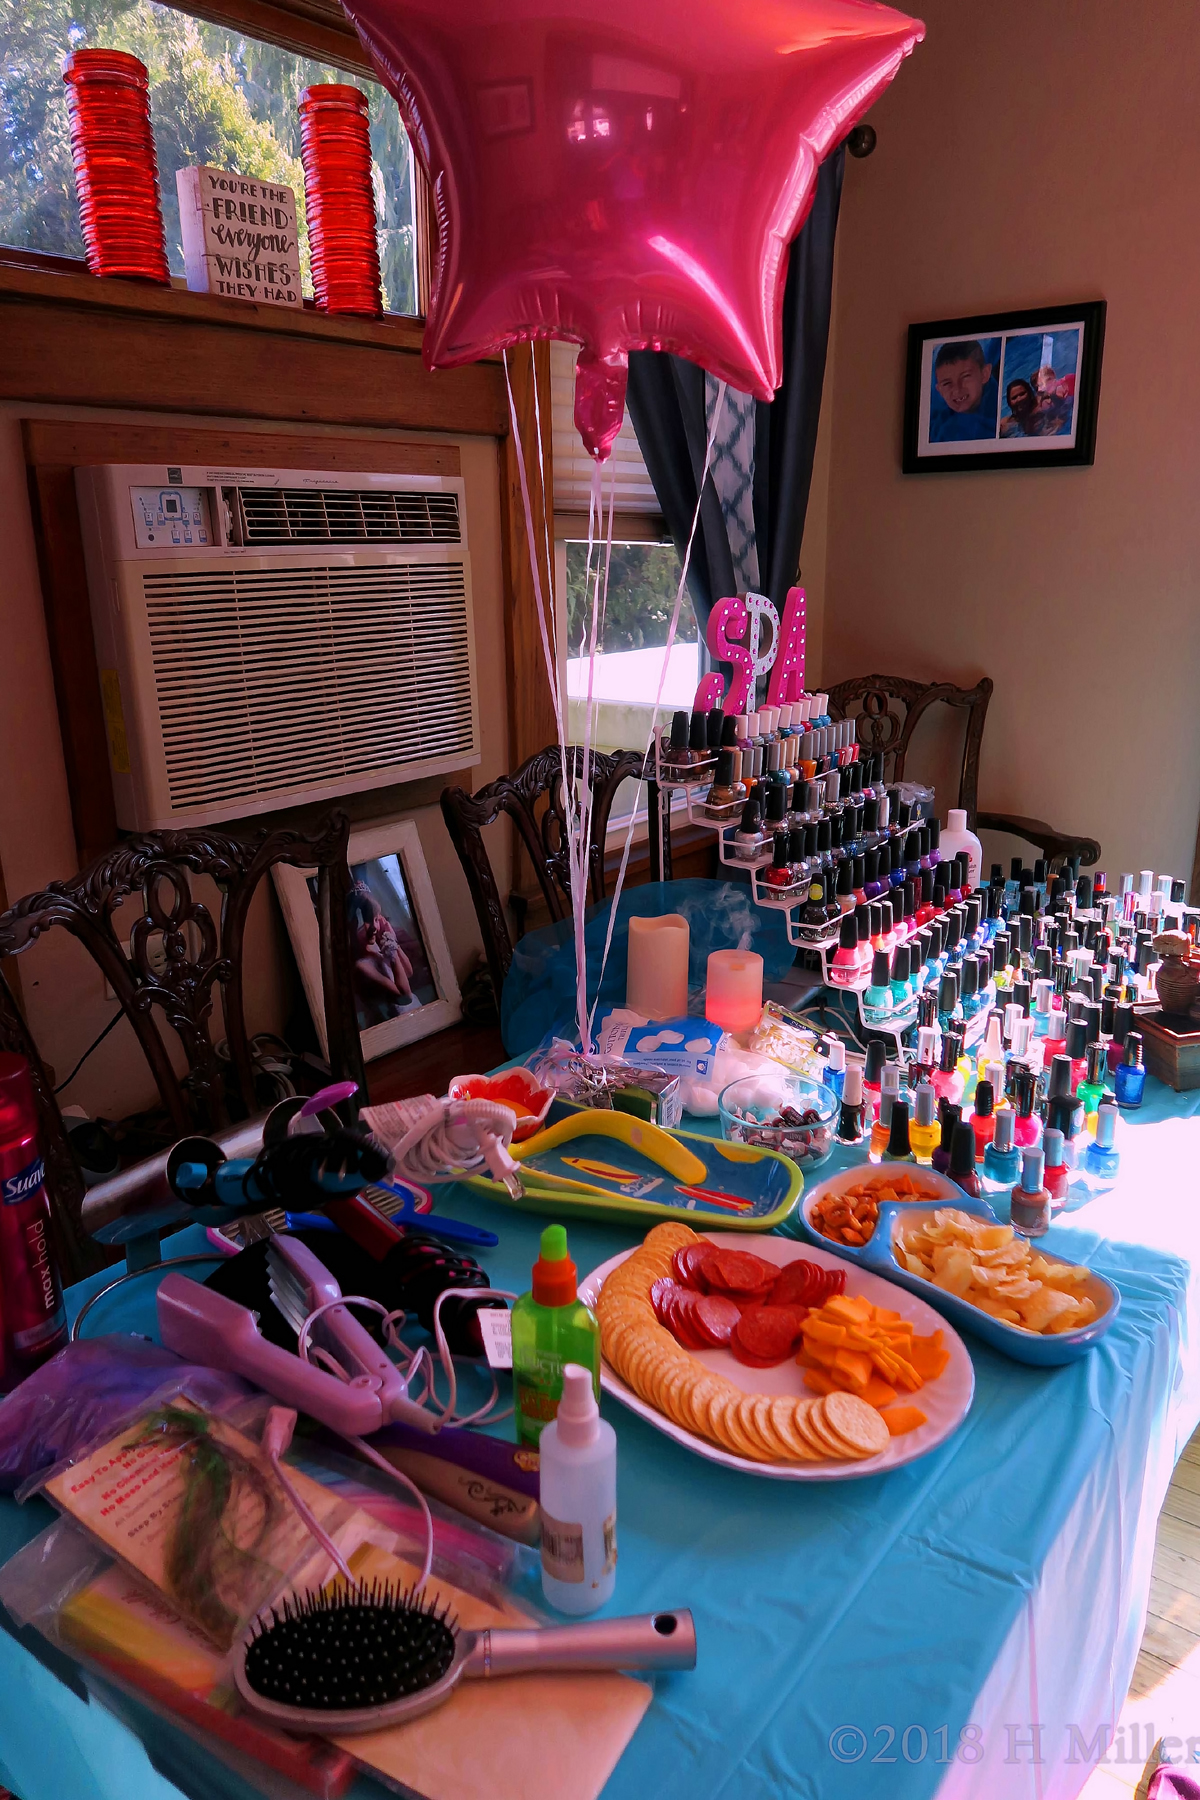 Hard Nail Color Choosing Decisions And Hot Pink Balloons! Kids Manicure Station And Kids Hair Salon! 